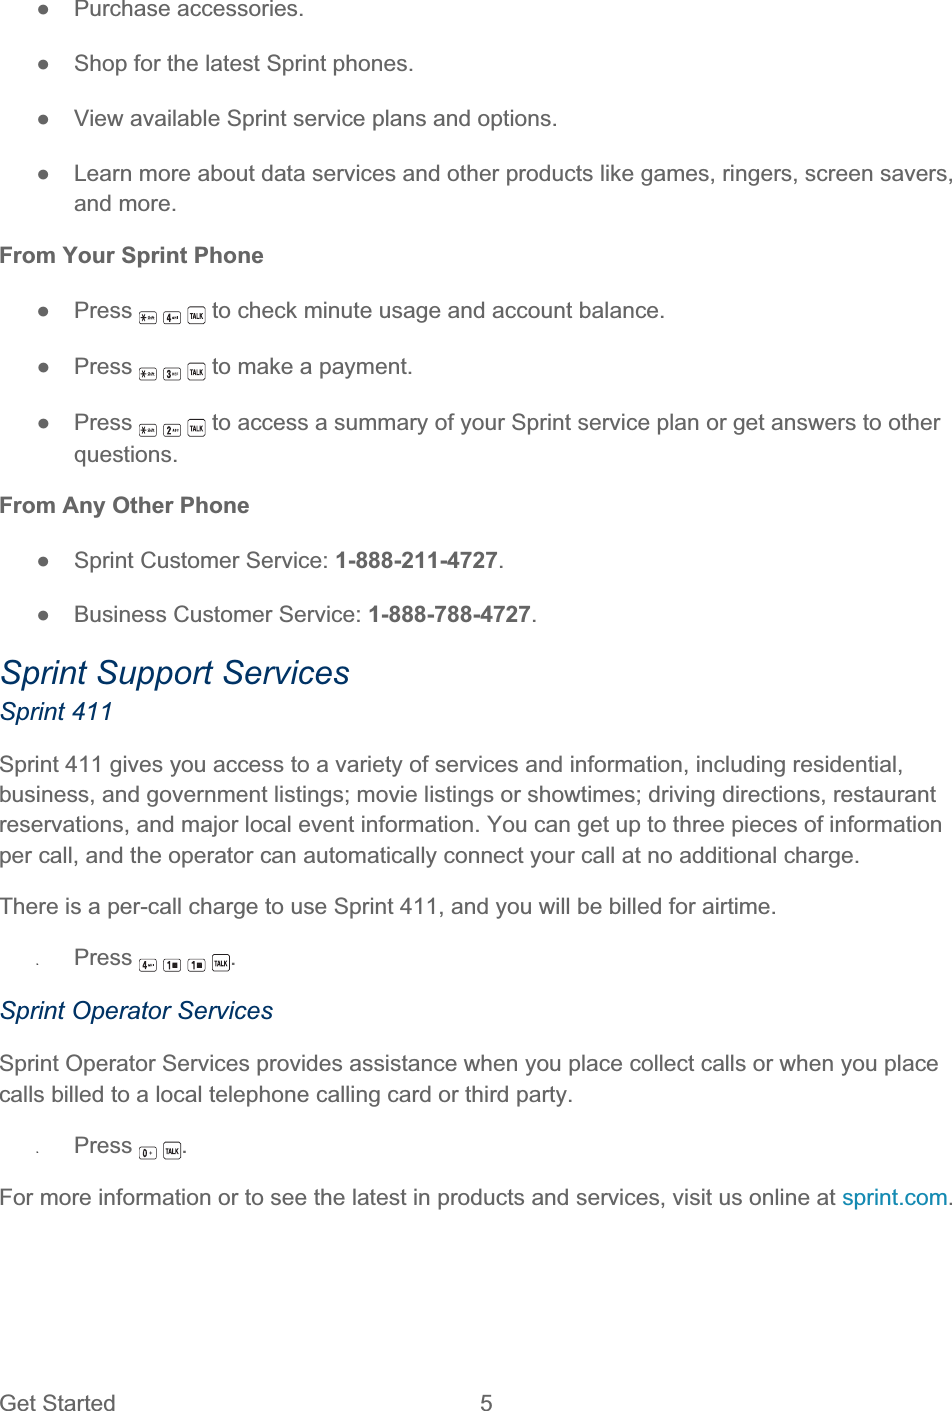 Get Started  5 ŏ Purchase accessories. ŏ  Shop for the latest Sprint phones. ŏ  View available Sprint service plans and options. ŏ  Learn more about data services and other products like games, ringers, screen savers, and more. From Your Sprint Phone ŏ Press   to check minute usage and account balance. ŏ Press   to make a payment. ŏ Press   to access a summary of your Sprint service plan or get answers to other questions.From Any Other Phone ŏ  Sprint Customer Service: 1-888-211-4727.ŏ  Business Customer Service: 1-888-788-4727.Sprint Support Services Sprint 411 Sprint 411 gives you access to a variety of services and information, including residential, business, and government listings; movie listings or showtimes; driving directions, restaurant reservations, and major local event information. You can get up to three pieces of information per call, and the operator can automatically connect your call at no additional charge. There is a per-call charge to use Sprint 411, and you will be billed for airtime. ʇPress .Sprint Operator Services Sprint Operator Services provides assistance when you place collect calls or when you place calls billed to a local telephone calling card or third party. ʇPress .For more information or to see the latest in products and services, visit us online at sprint.com.